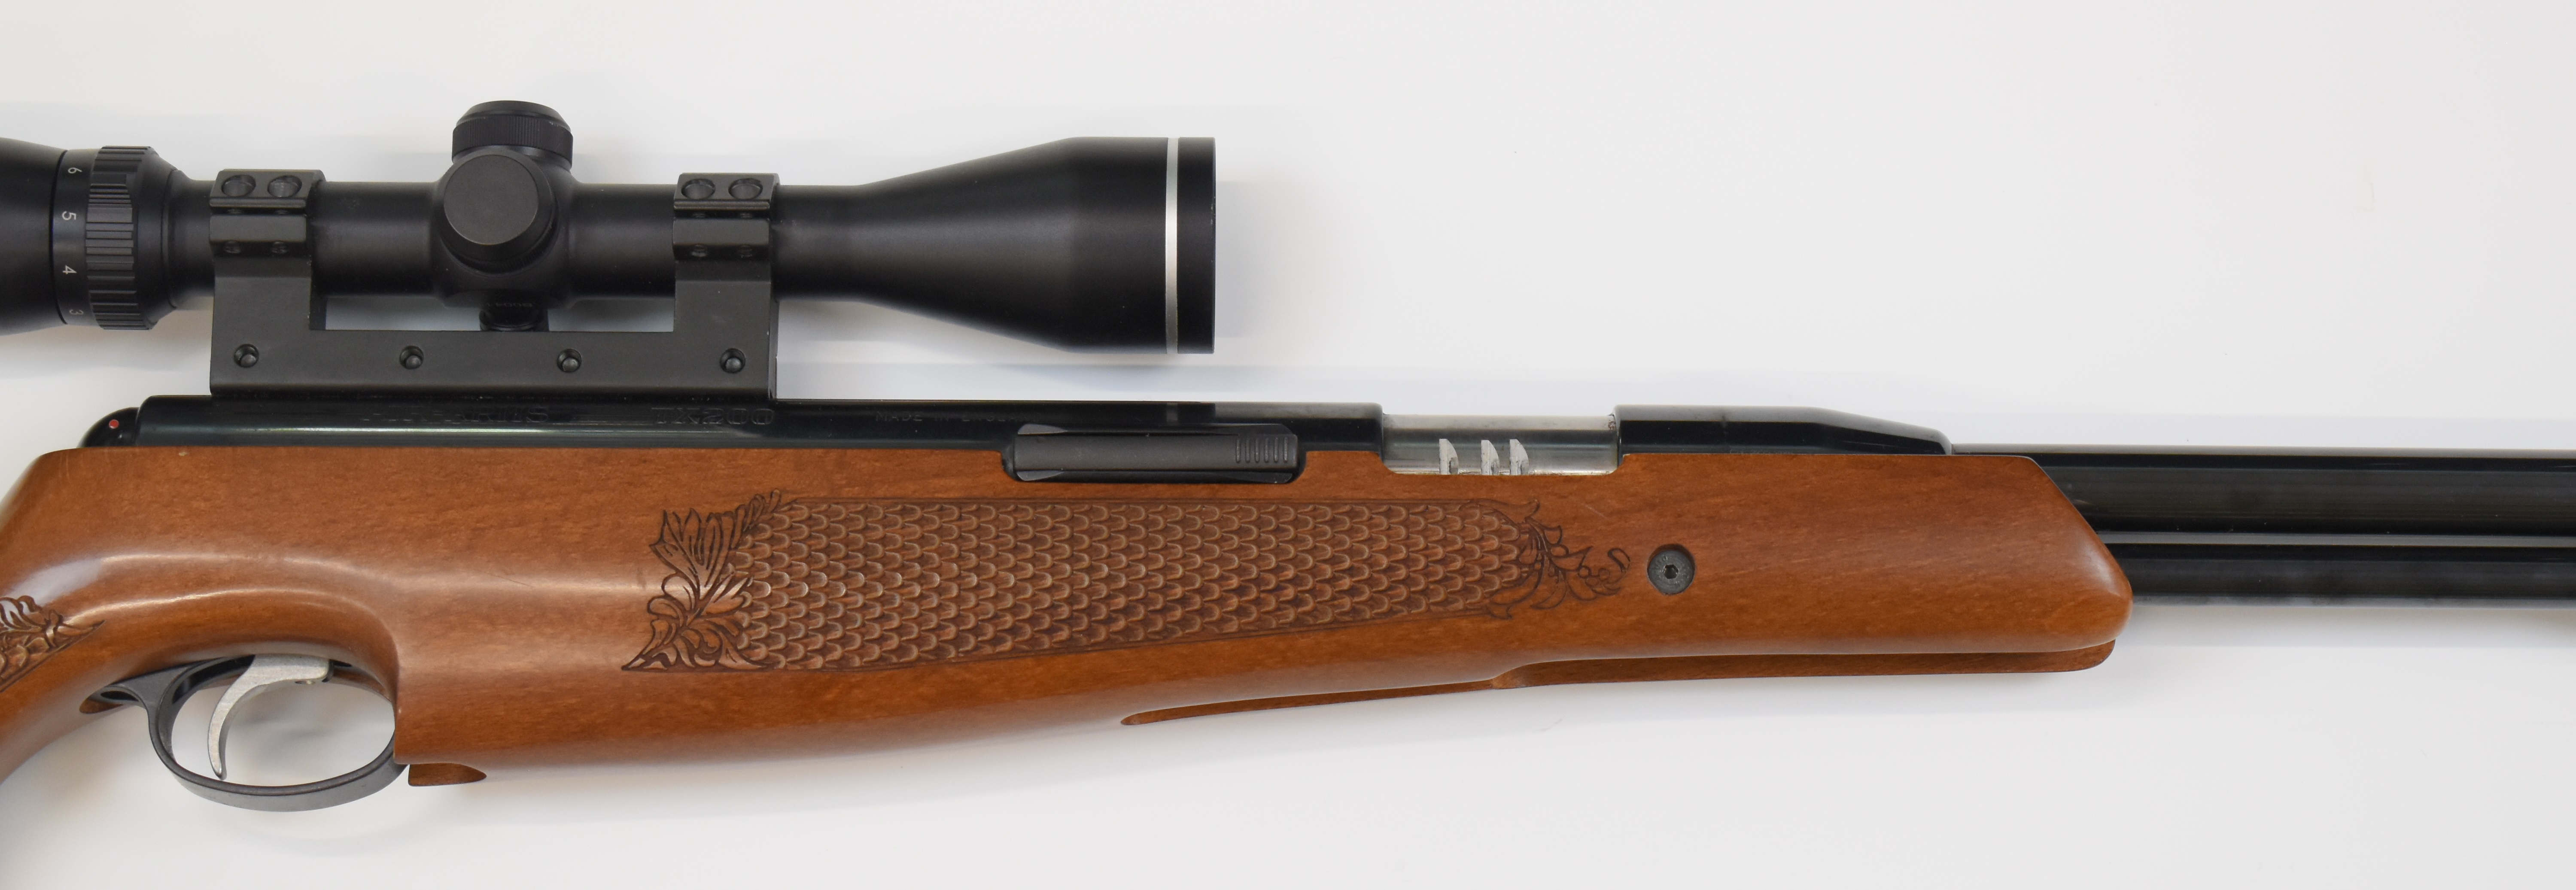 Air Arms TX200 .22 under-lever air rifle with carved semi-pistol grip and forend, adjustable - Image 4 of 11